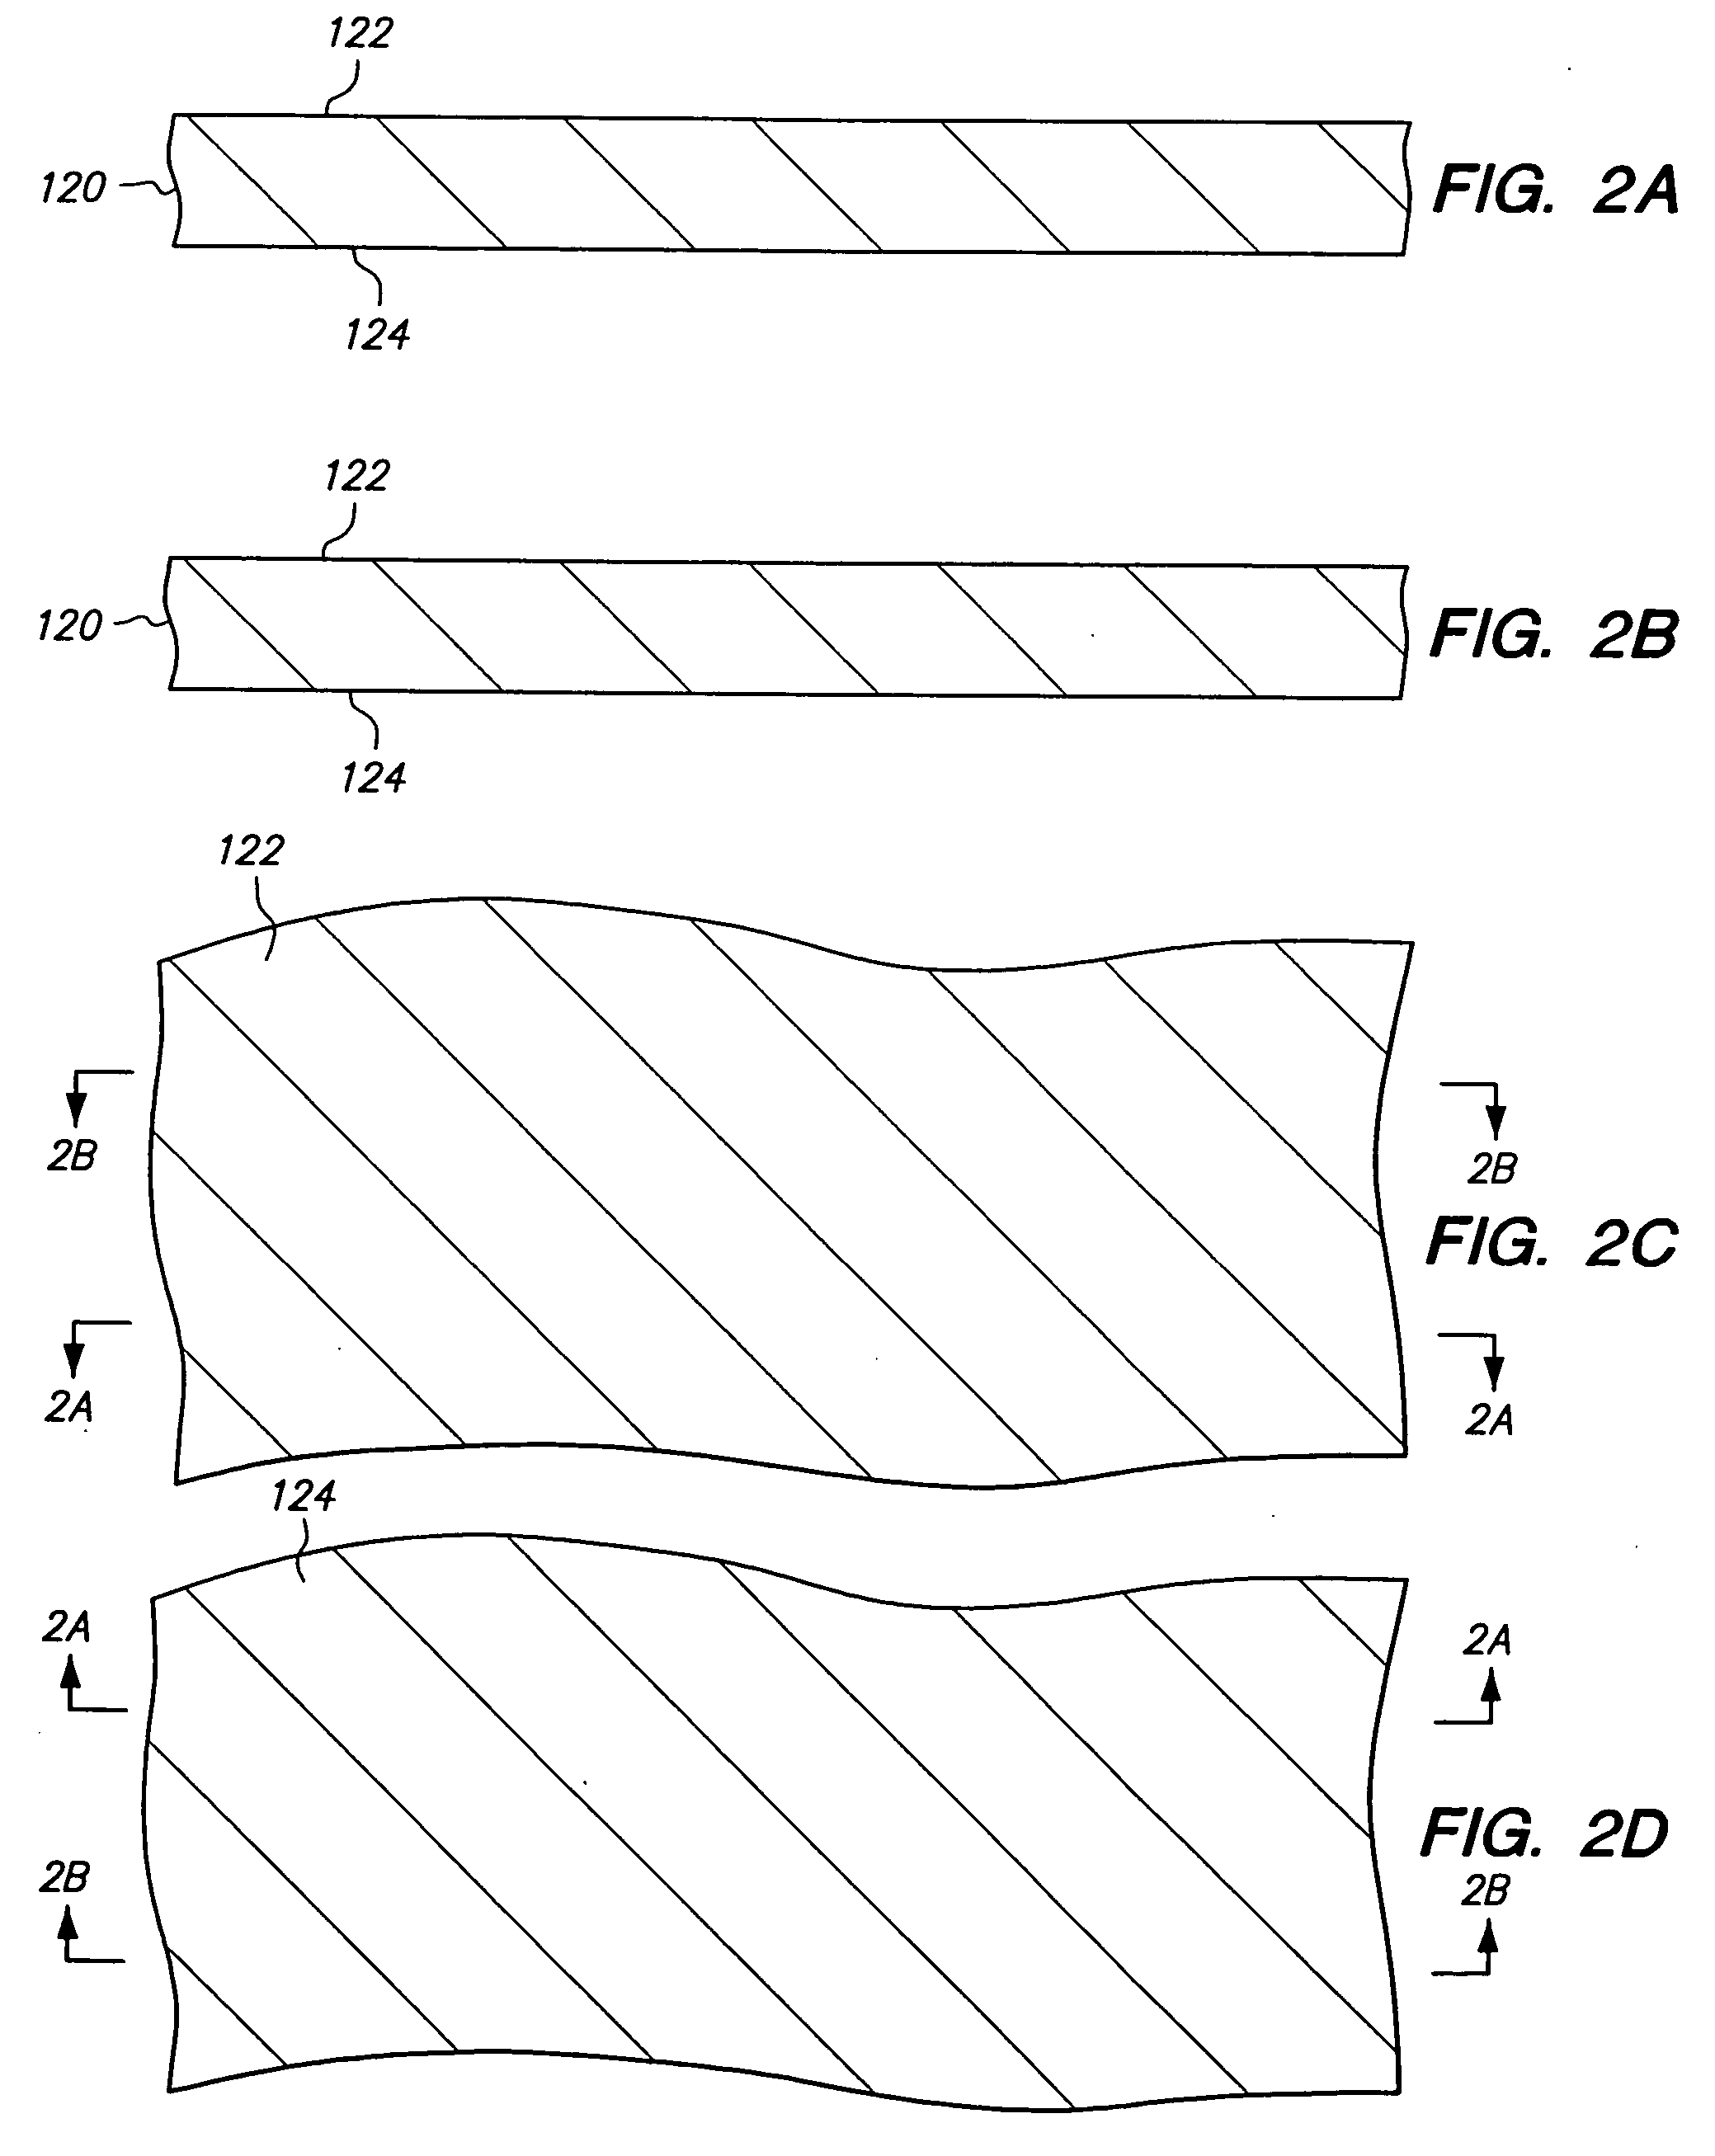 Method of making a semiconductor chip assembly using multiple etch steps to form a pillar after forming a routing line